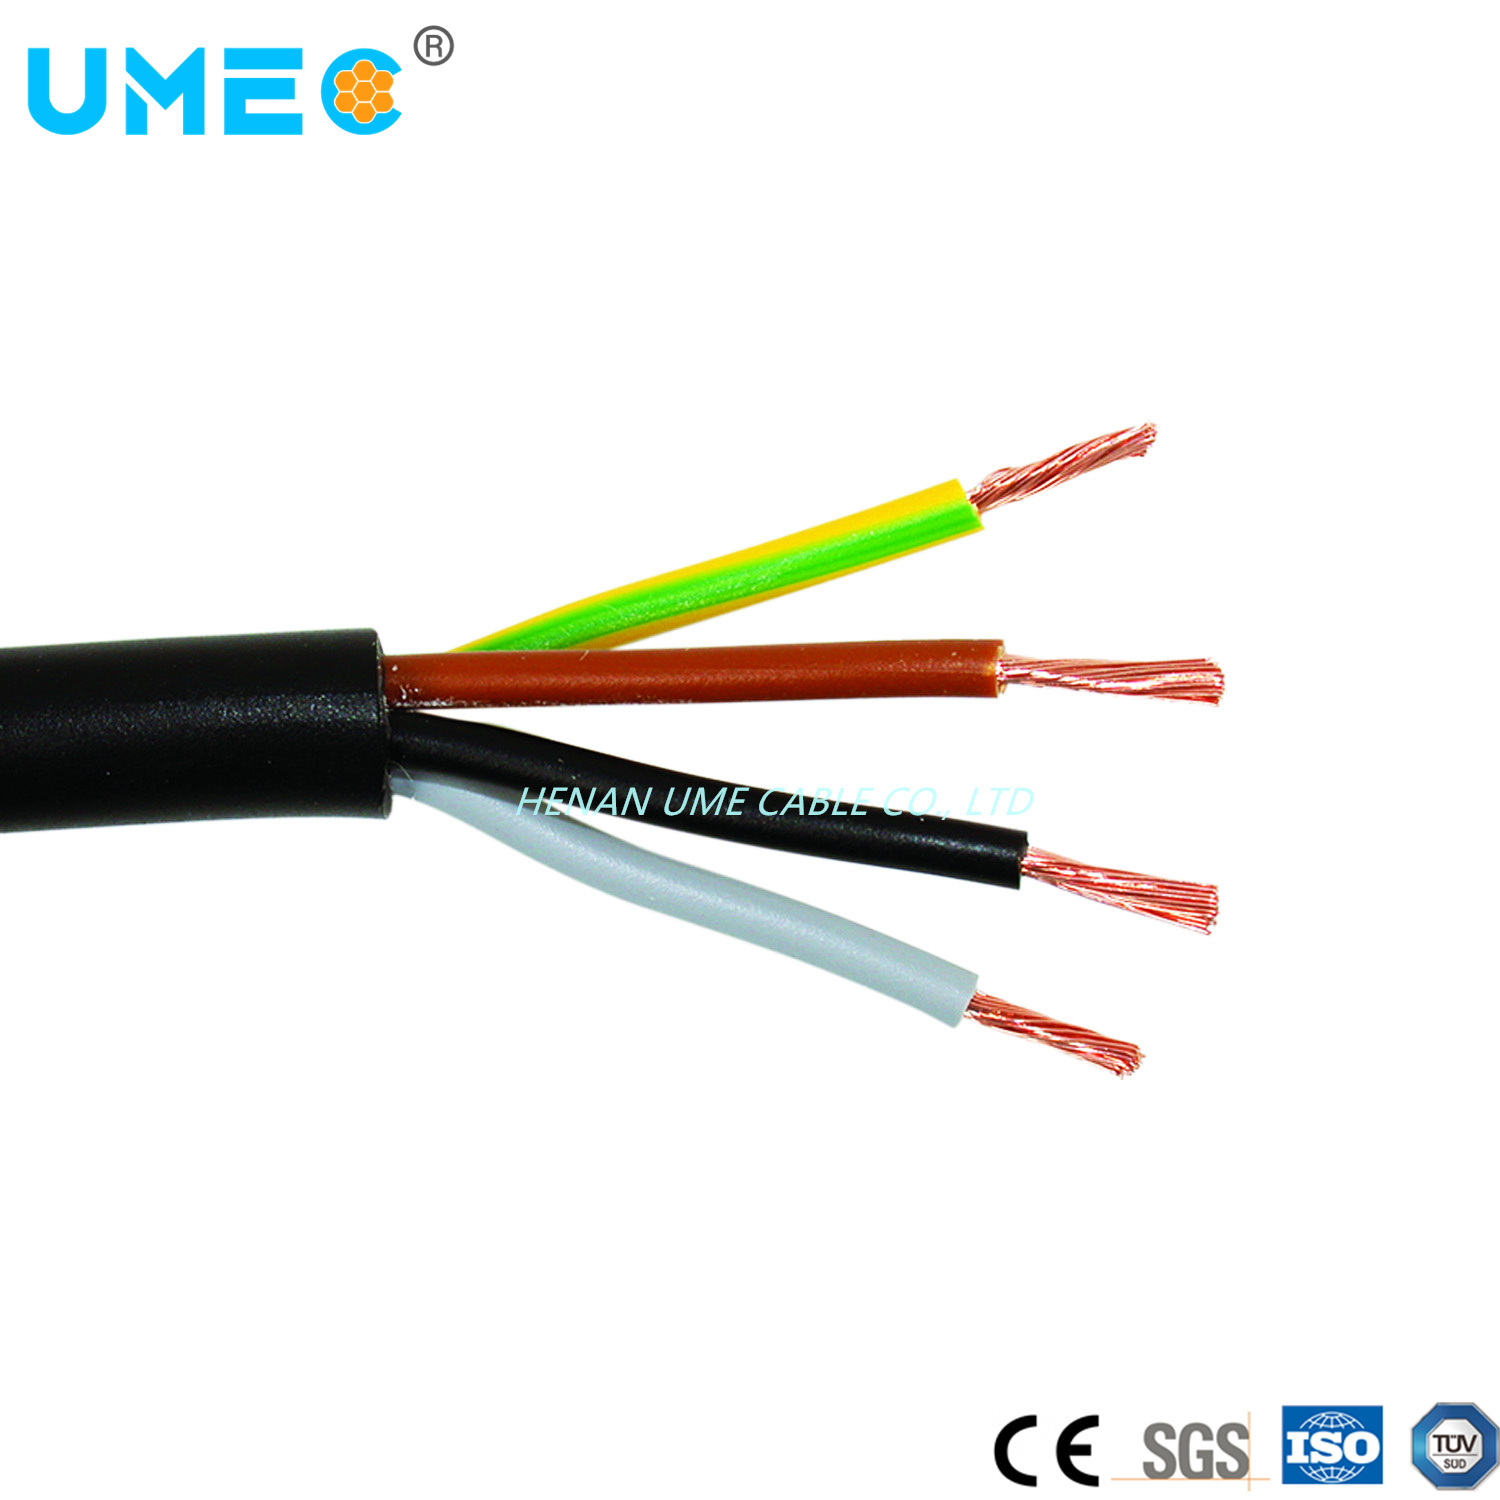 Control Cable with Low Smoke Low Halogen and Flame Retardant